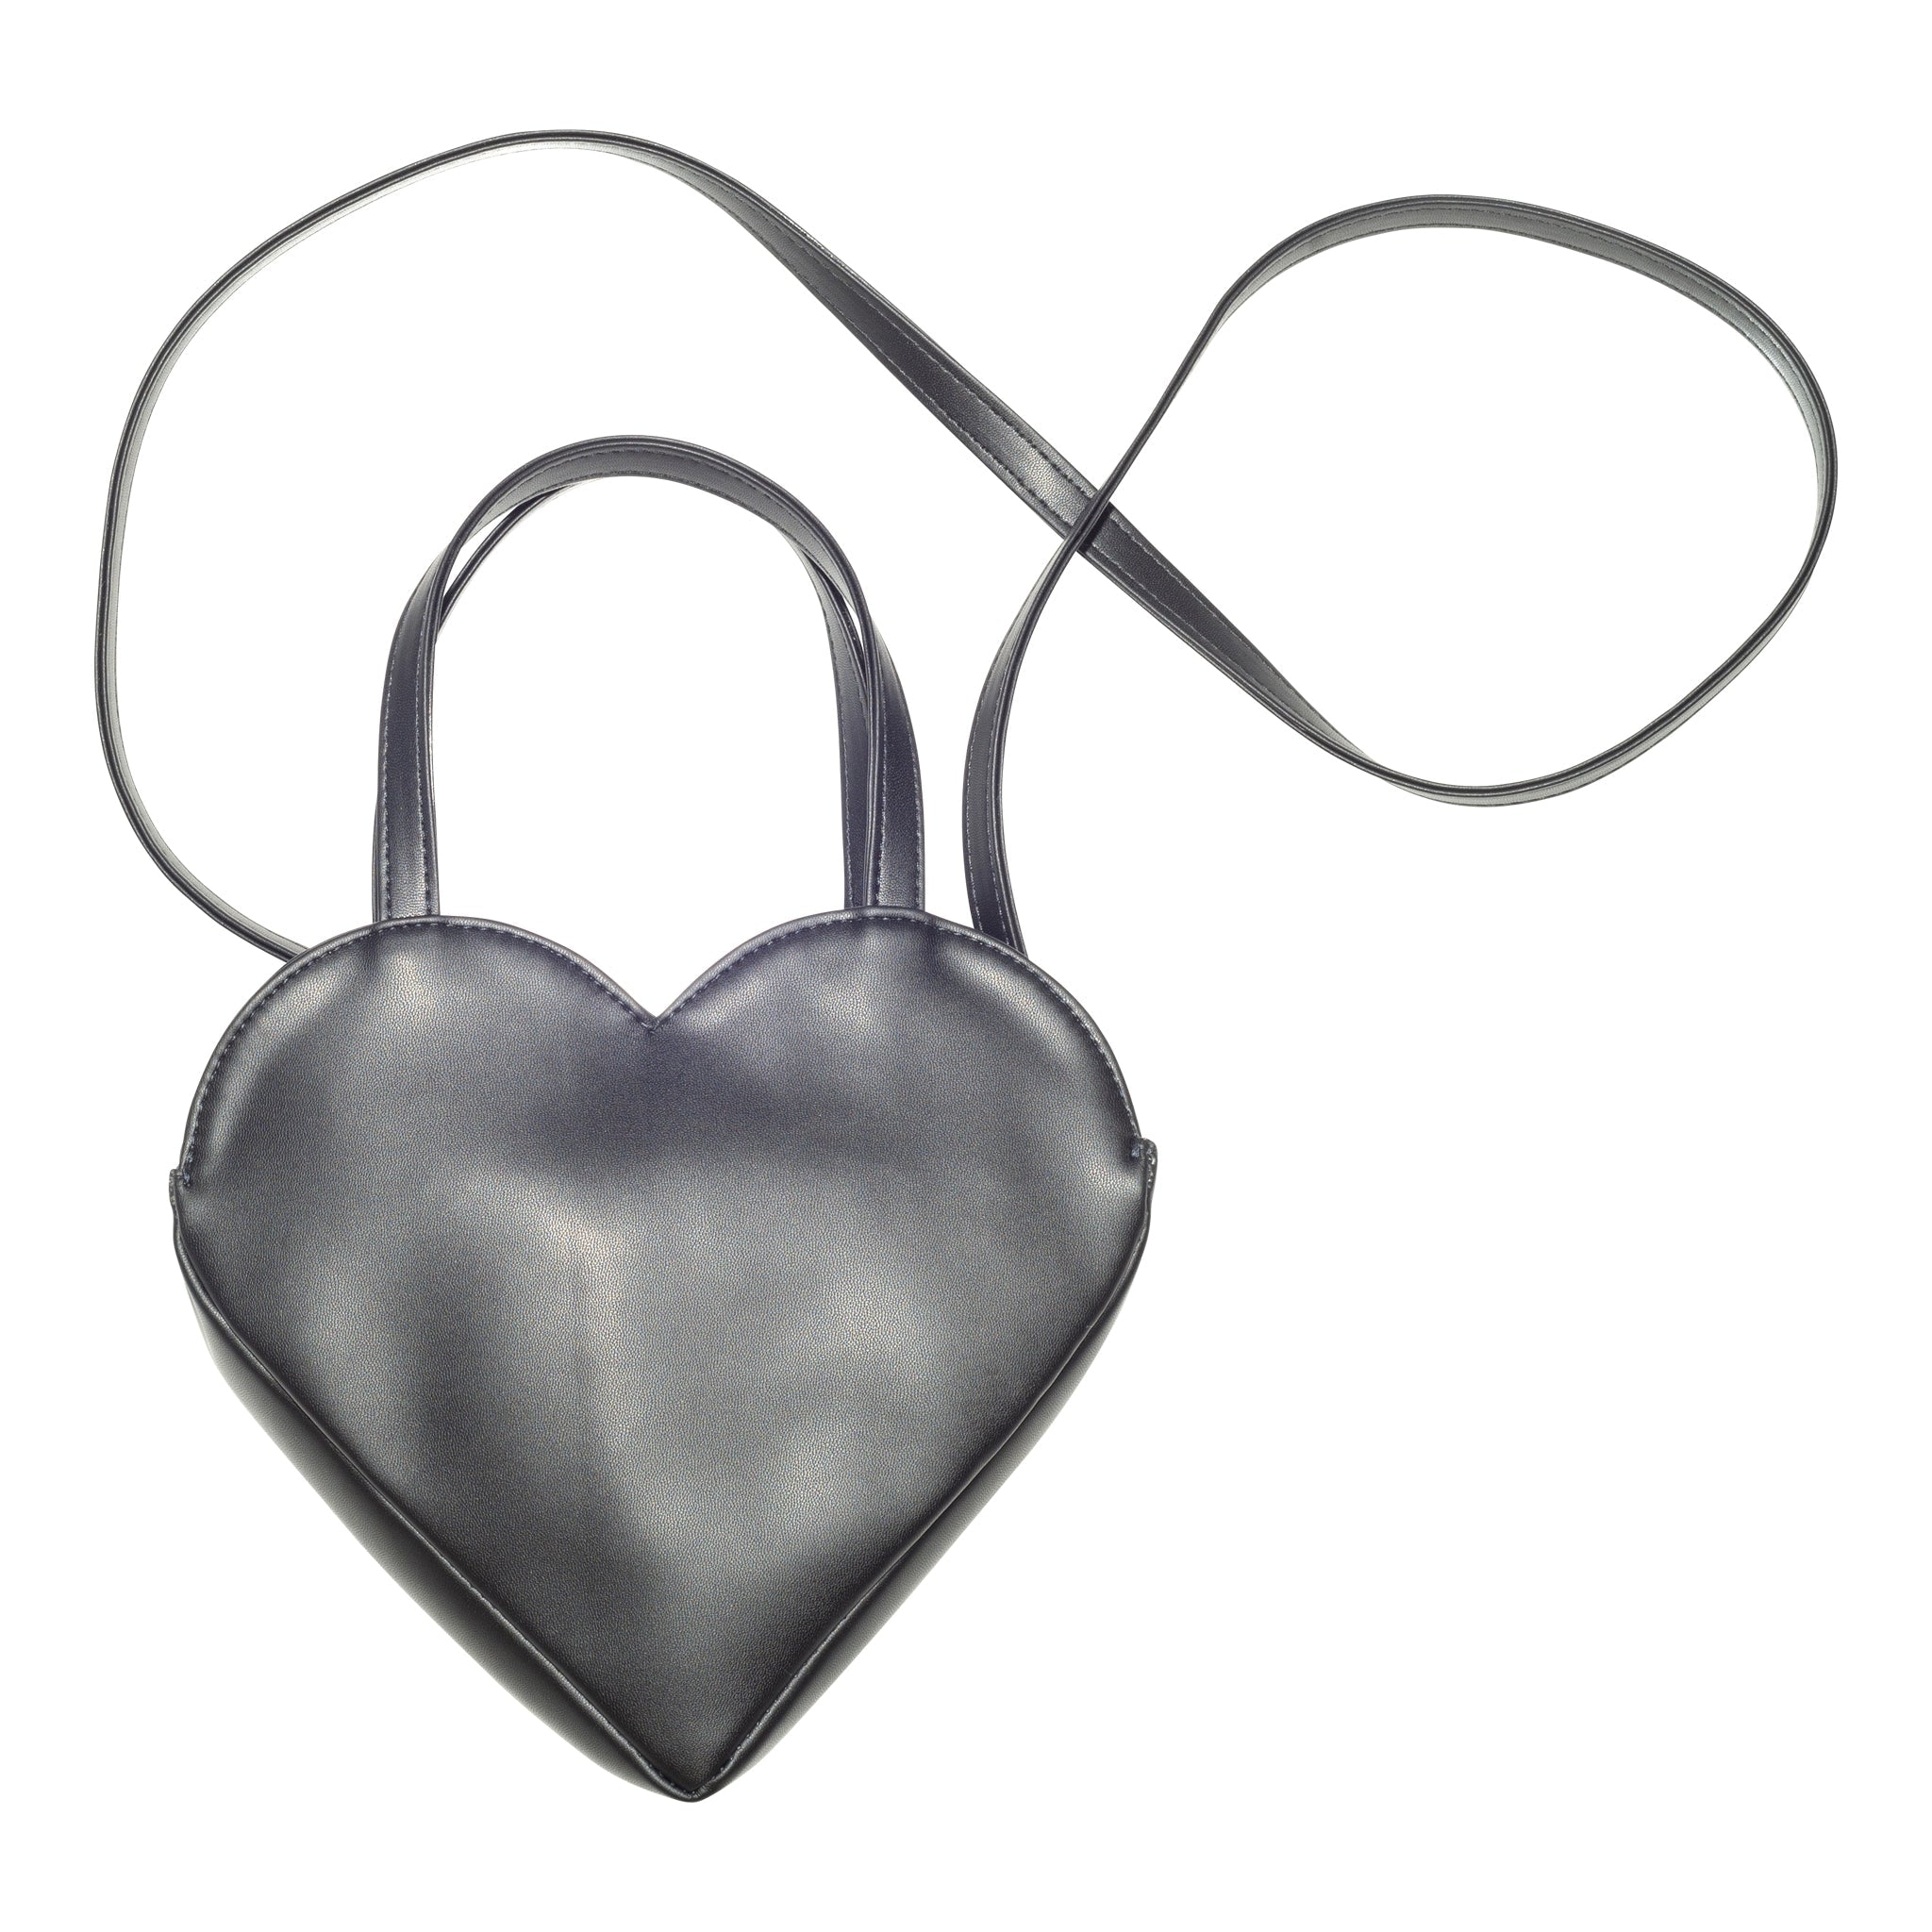 Wrapables Heart Shaped Purse Hook Hanger with Rhinestones Black